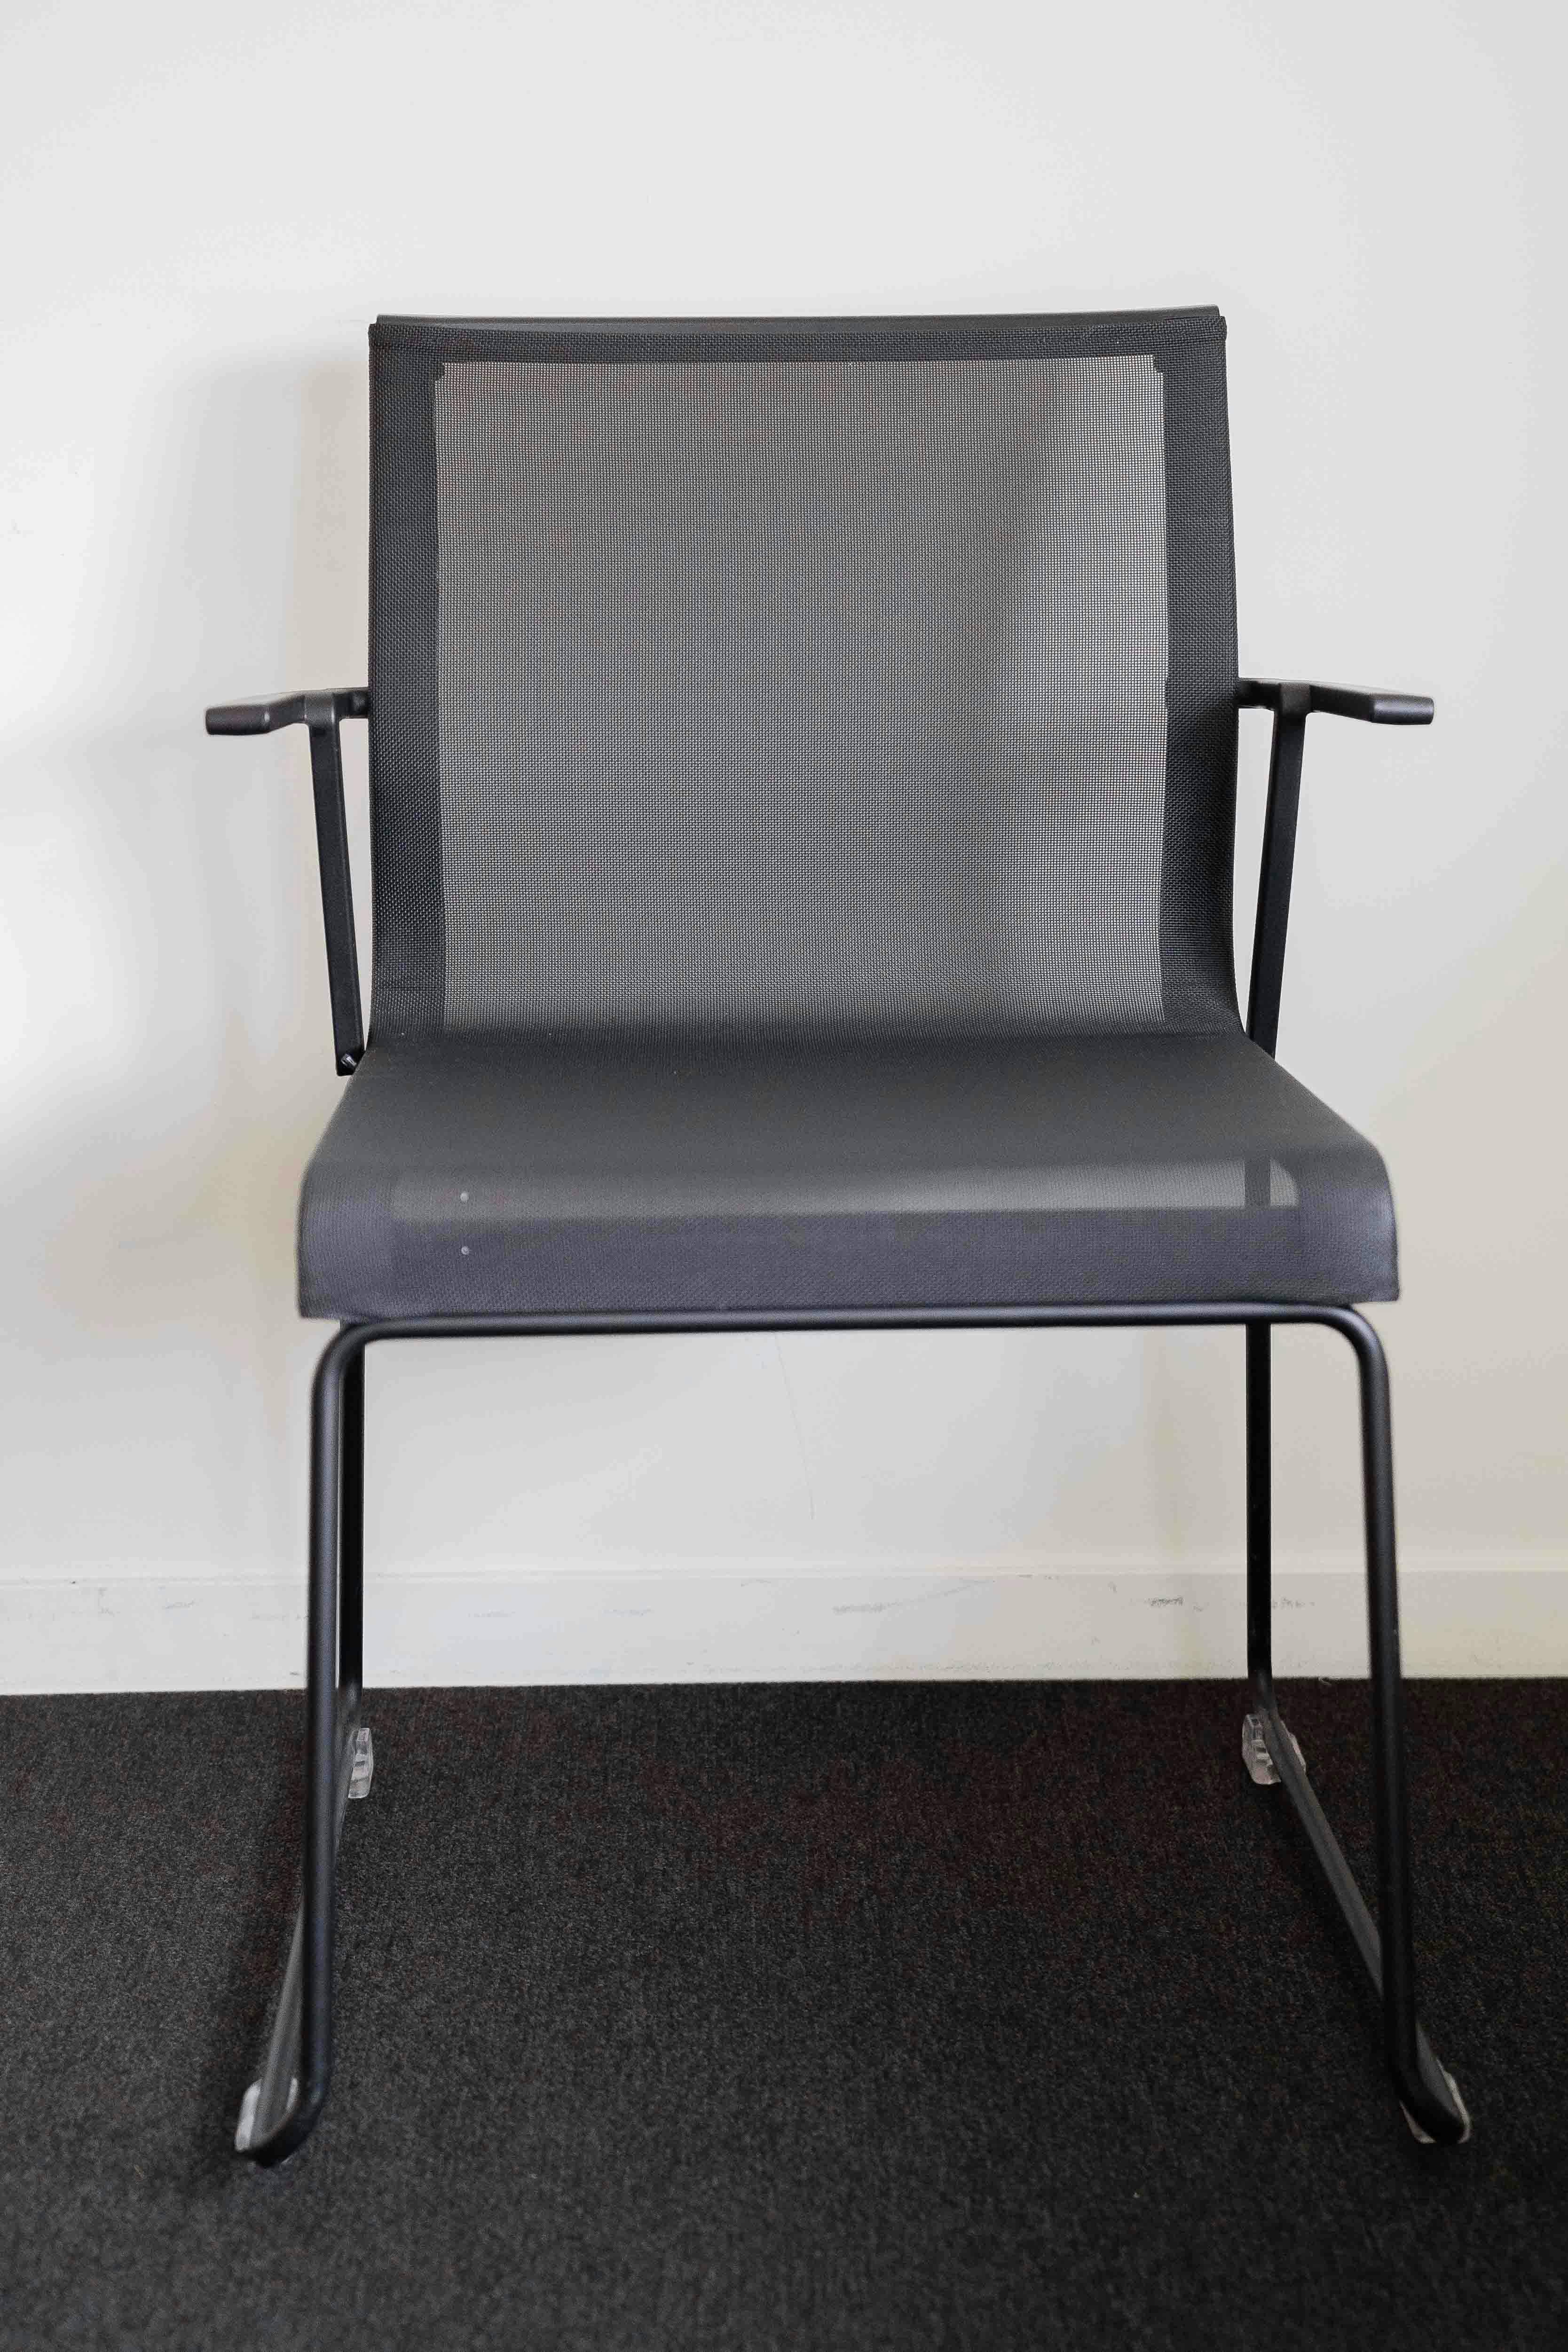 ICF Black Mesh Office Chair with armrests - Relieve Furniture